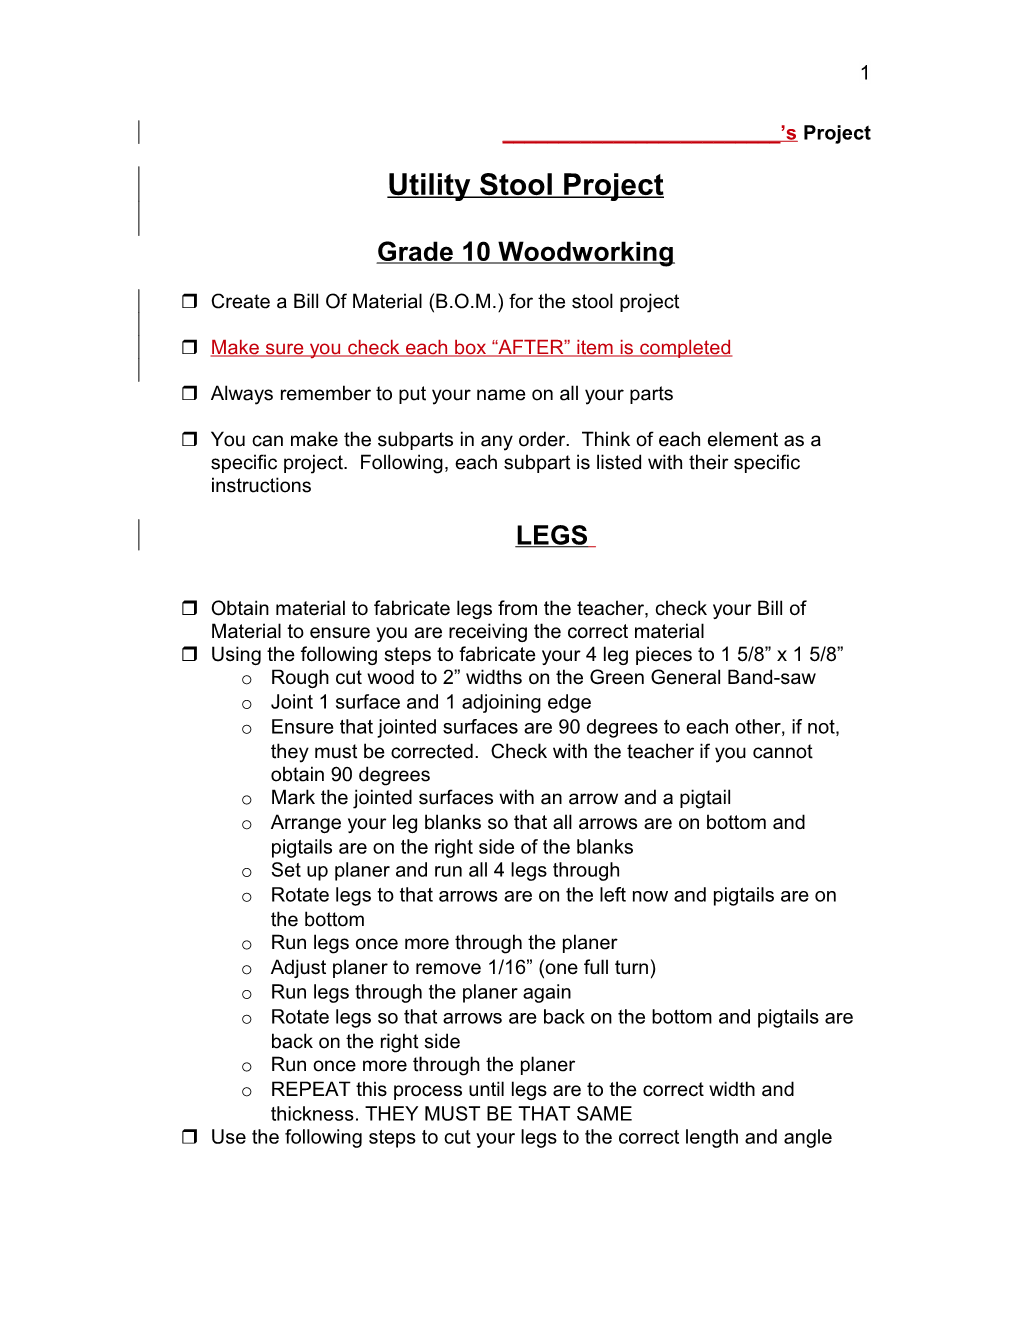 Utility Stool Project